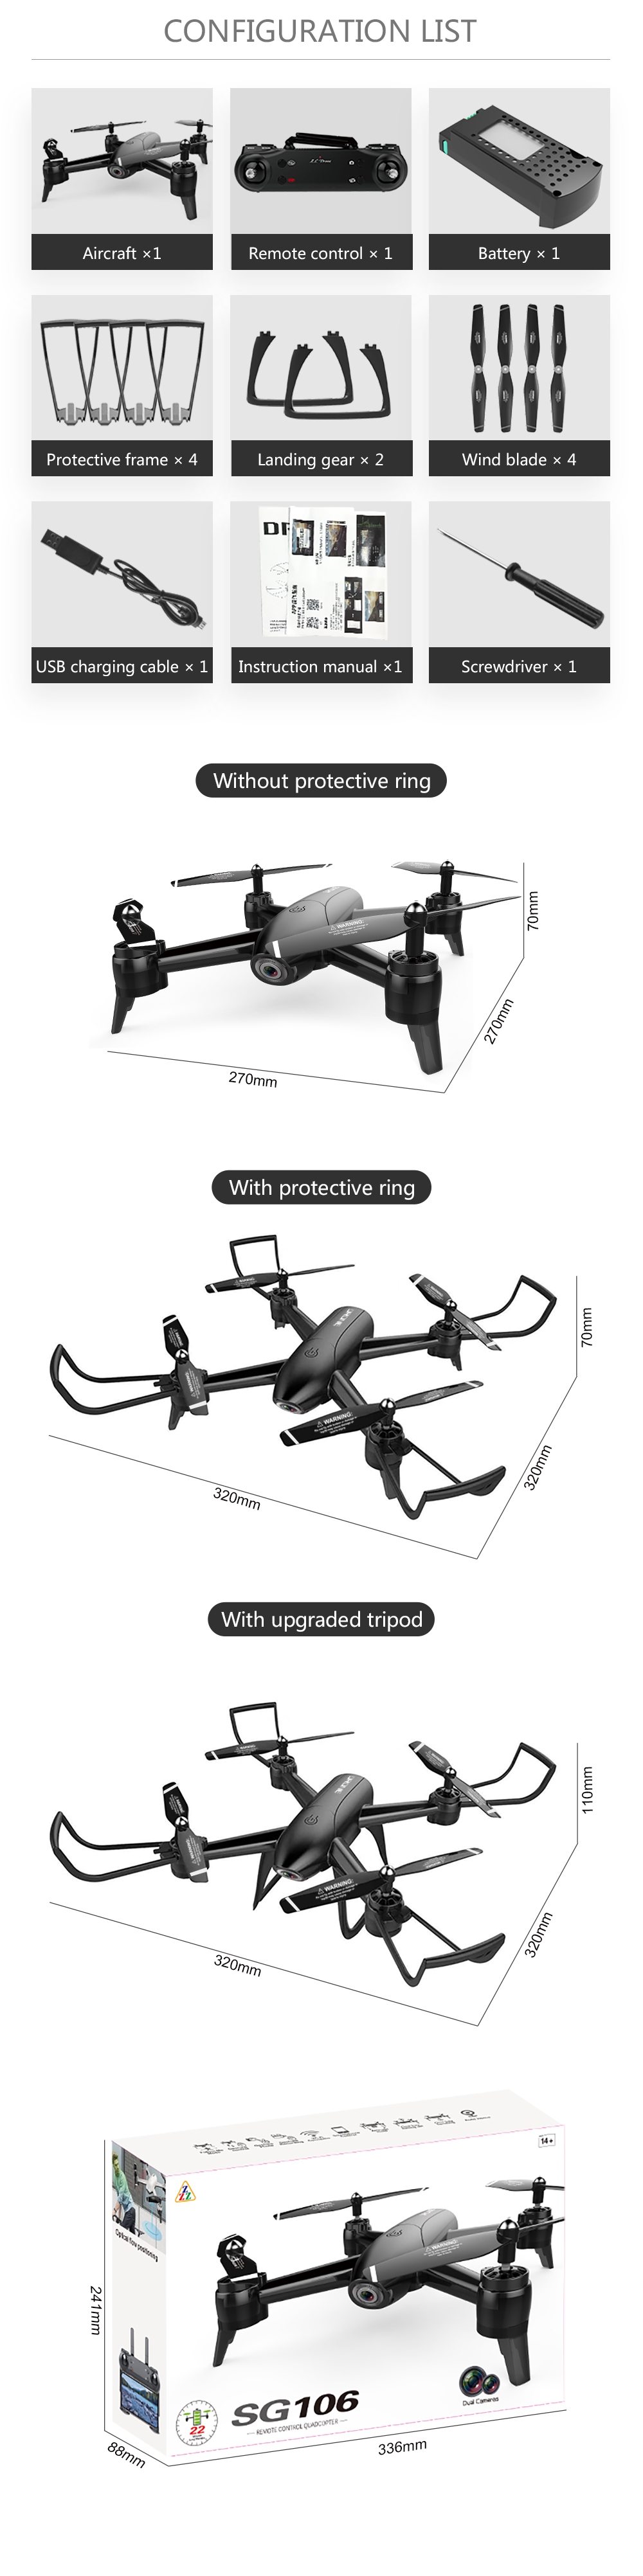 SG106 WiFi FPV With 4K / 1080P Wide Angle Camera Optical Flow Positioning RC Drone Quadcopter RTF 41